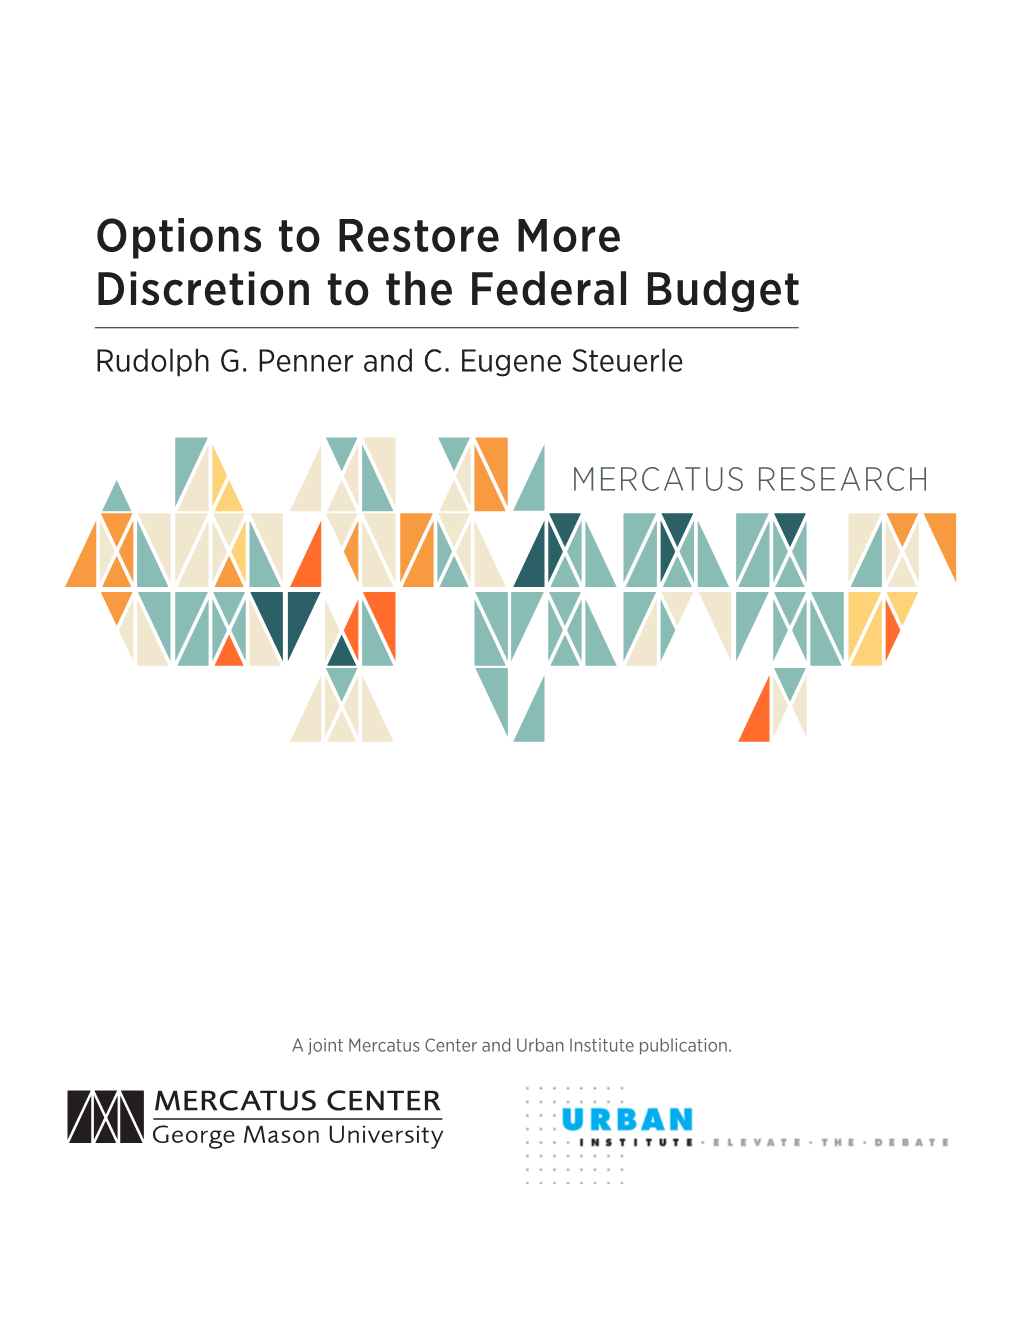 Options to Restore More Discretion to the Federal Budget Rudolph G